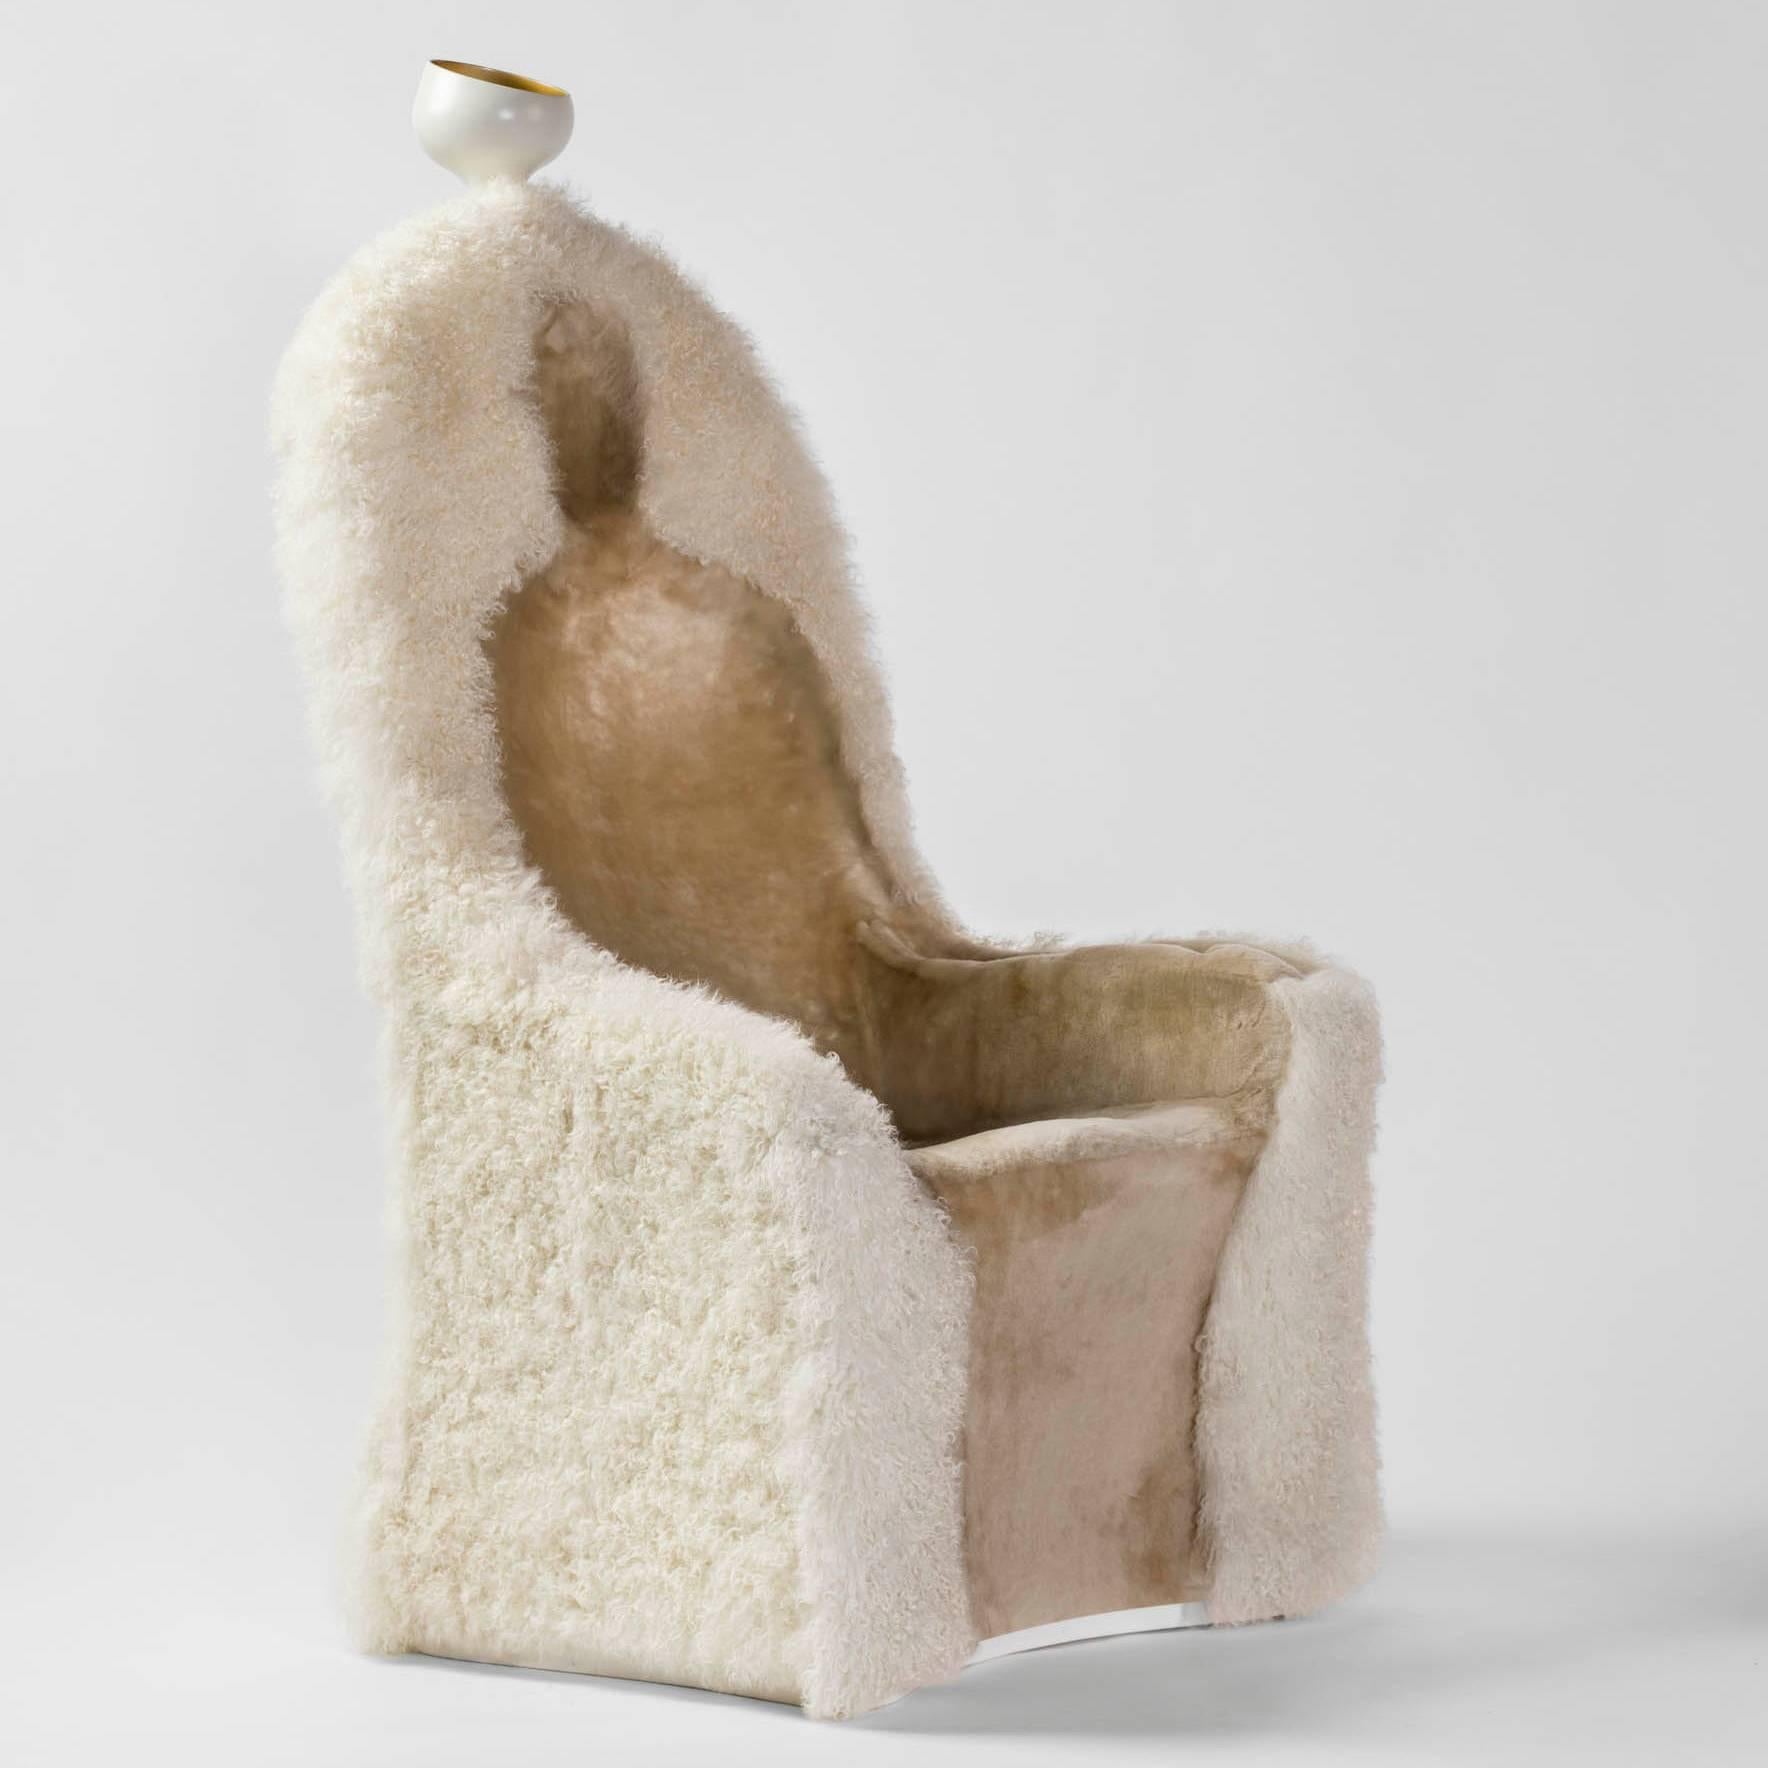 Armchair designed by Salvador Dali manufactured in Spain by BD.

